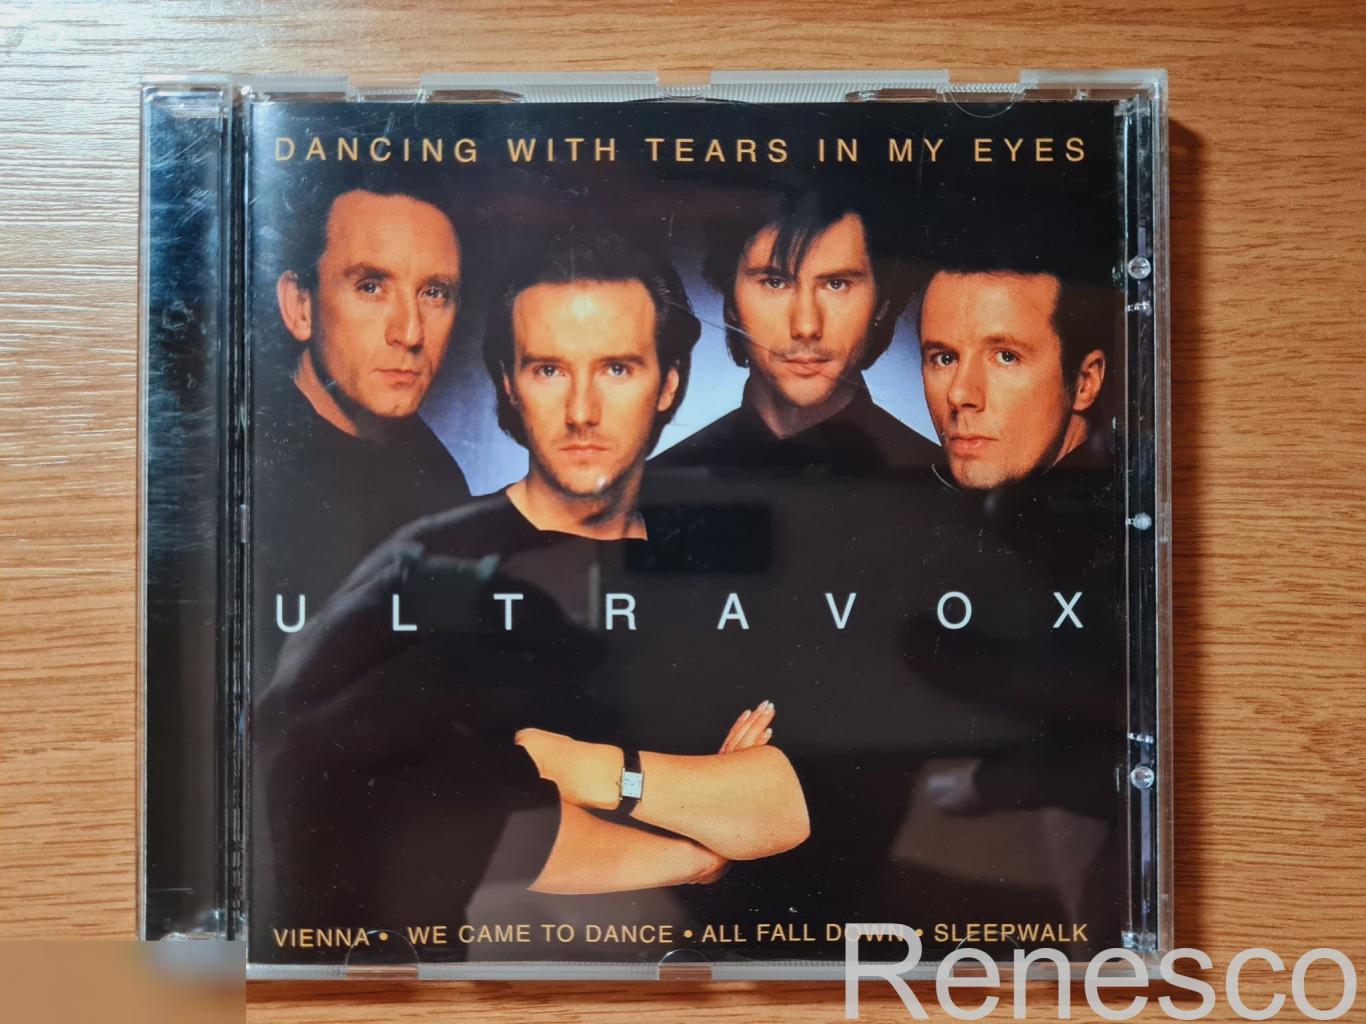 Ultravox ?– Dancing With Tears In My Eyes (Holland) (1996) (Reissue)